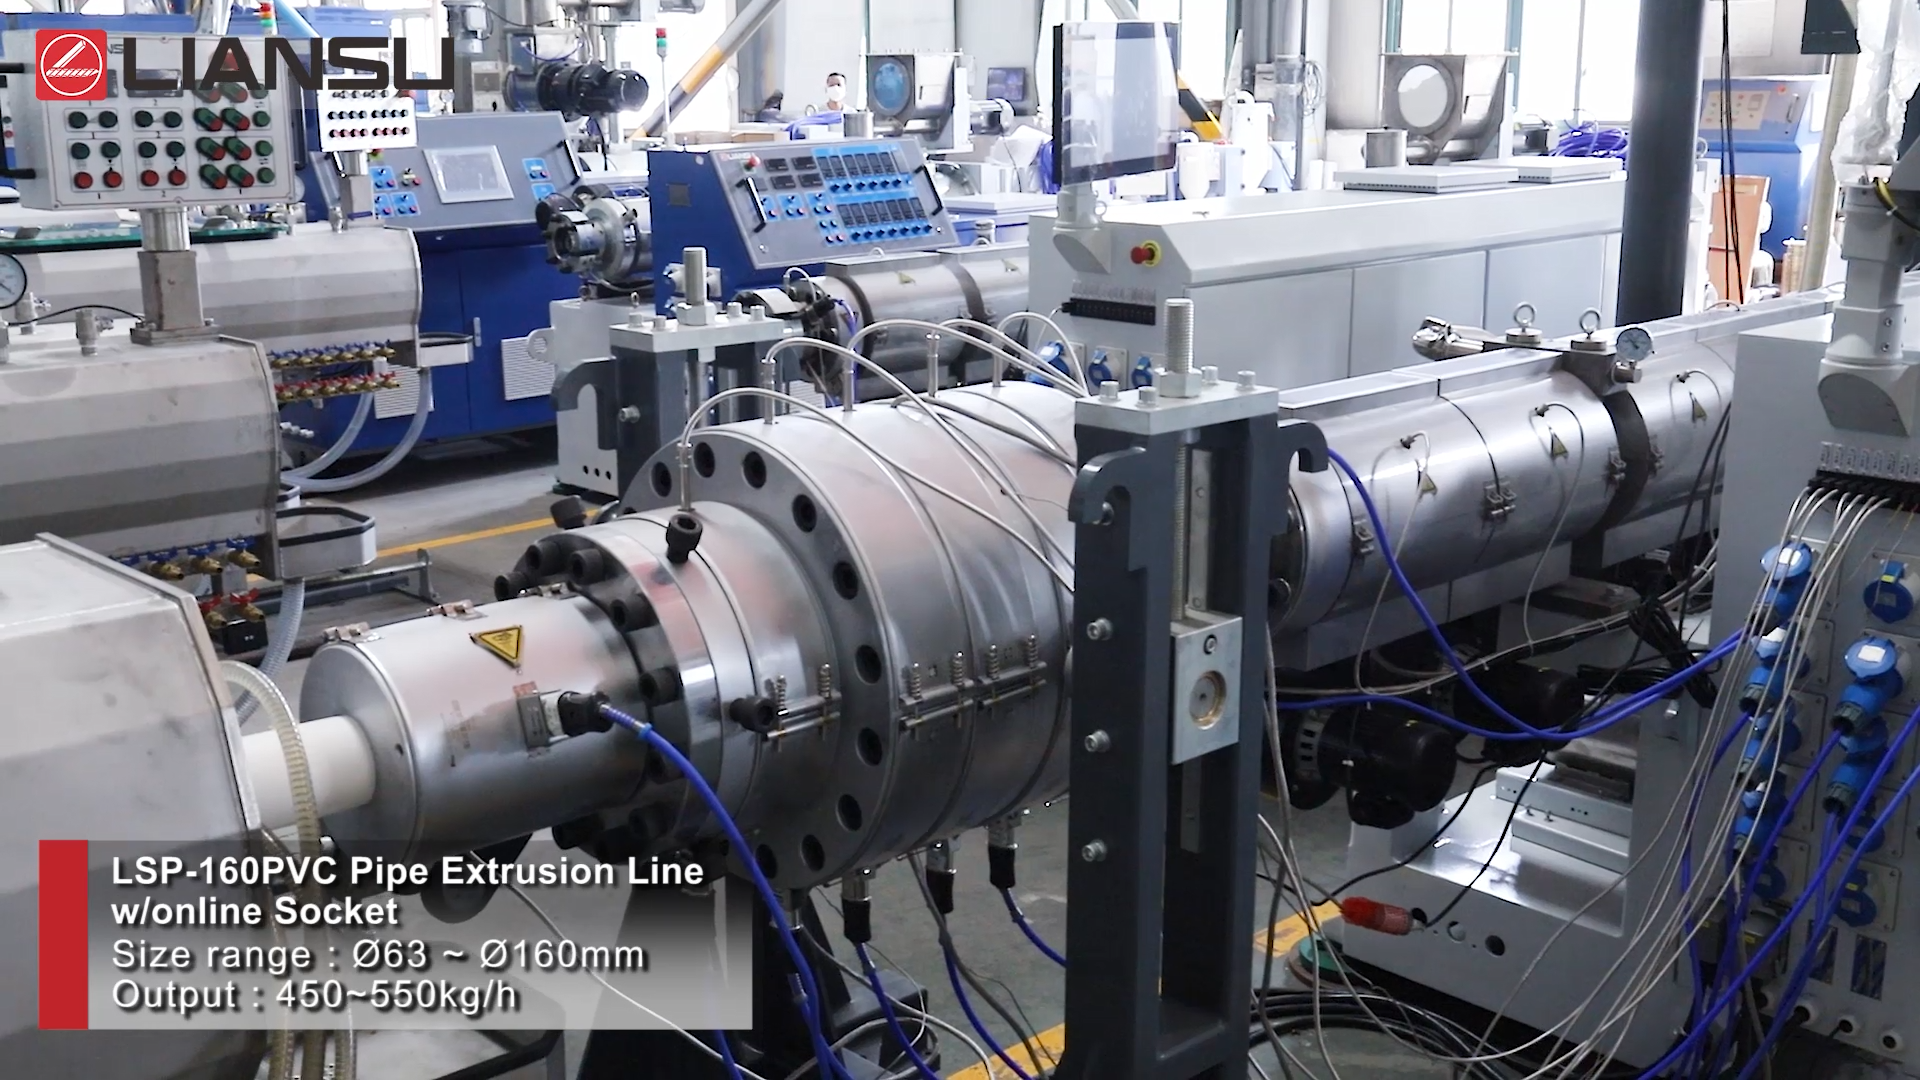 LSP-160PVC Pipe Extrusion Line w/online Socket